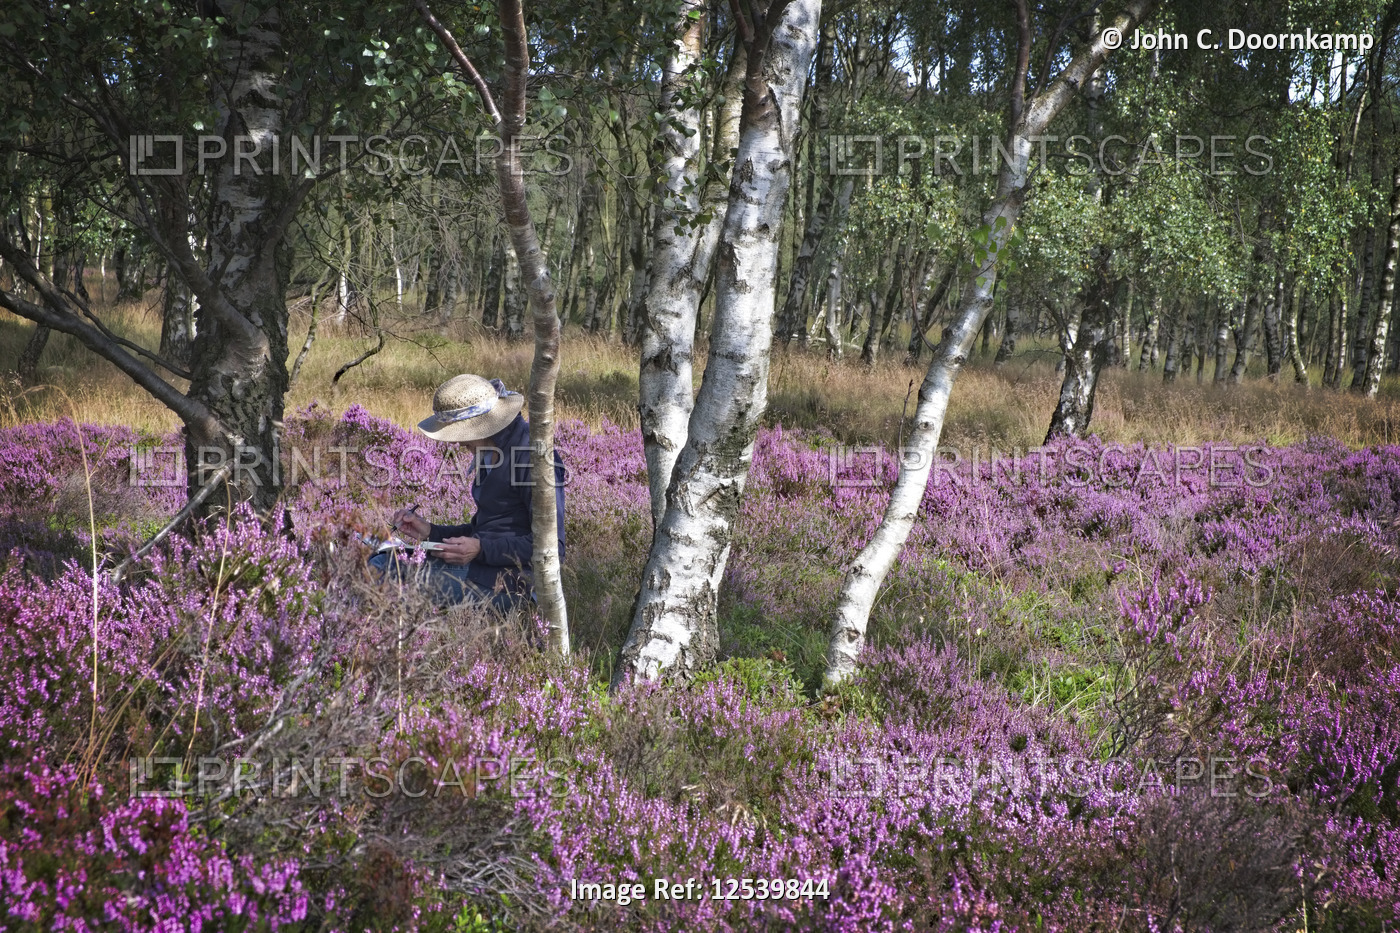 ARTIST AMONGST THE SILVER BIRCH TREES AND THE PURPLE HEATHER, DERBYSHIRE, ENGLAND